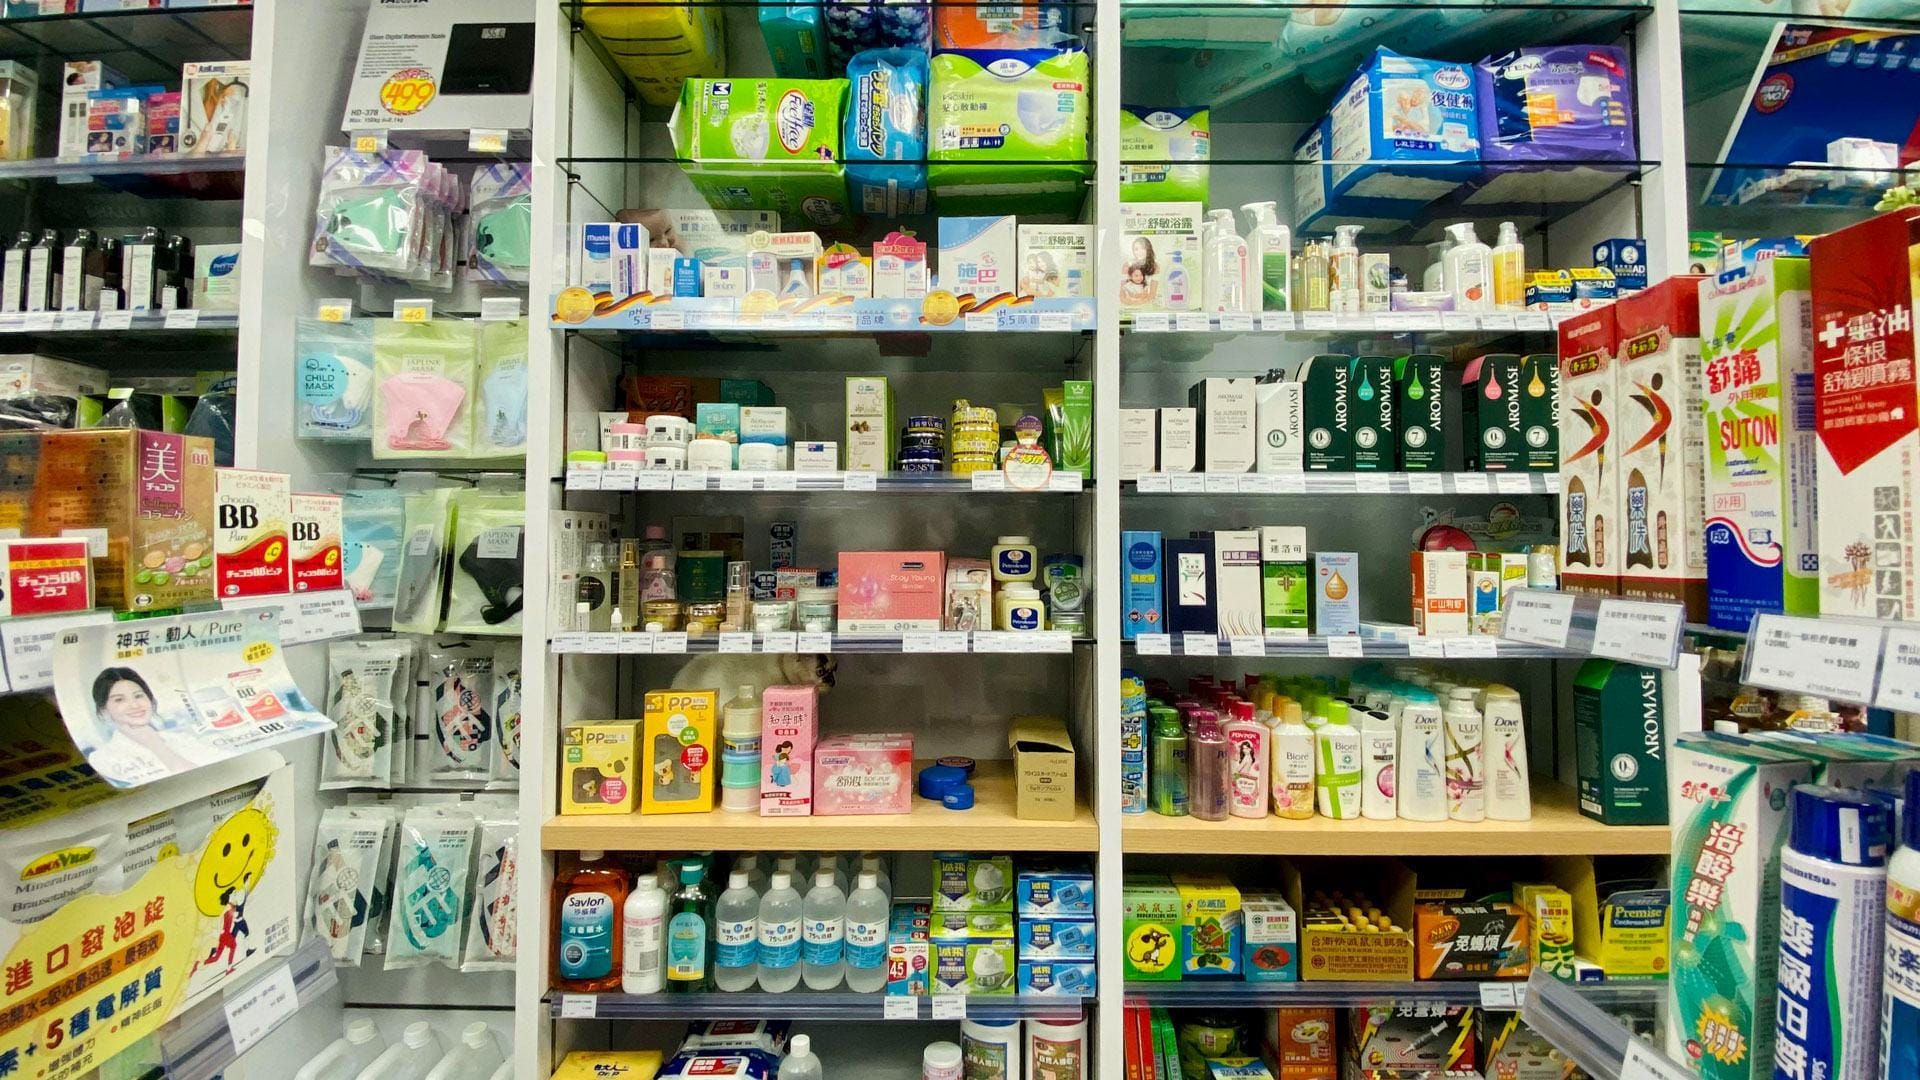 You’ve got eagle eyes if you can spot the sneaky cat hiding in plain sight in the pharmacy